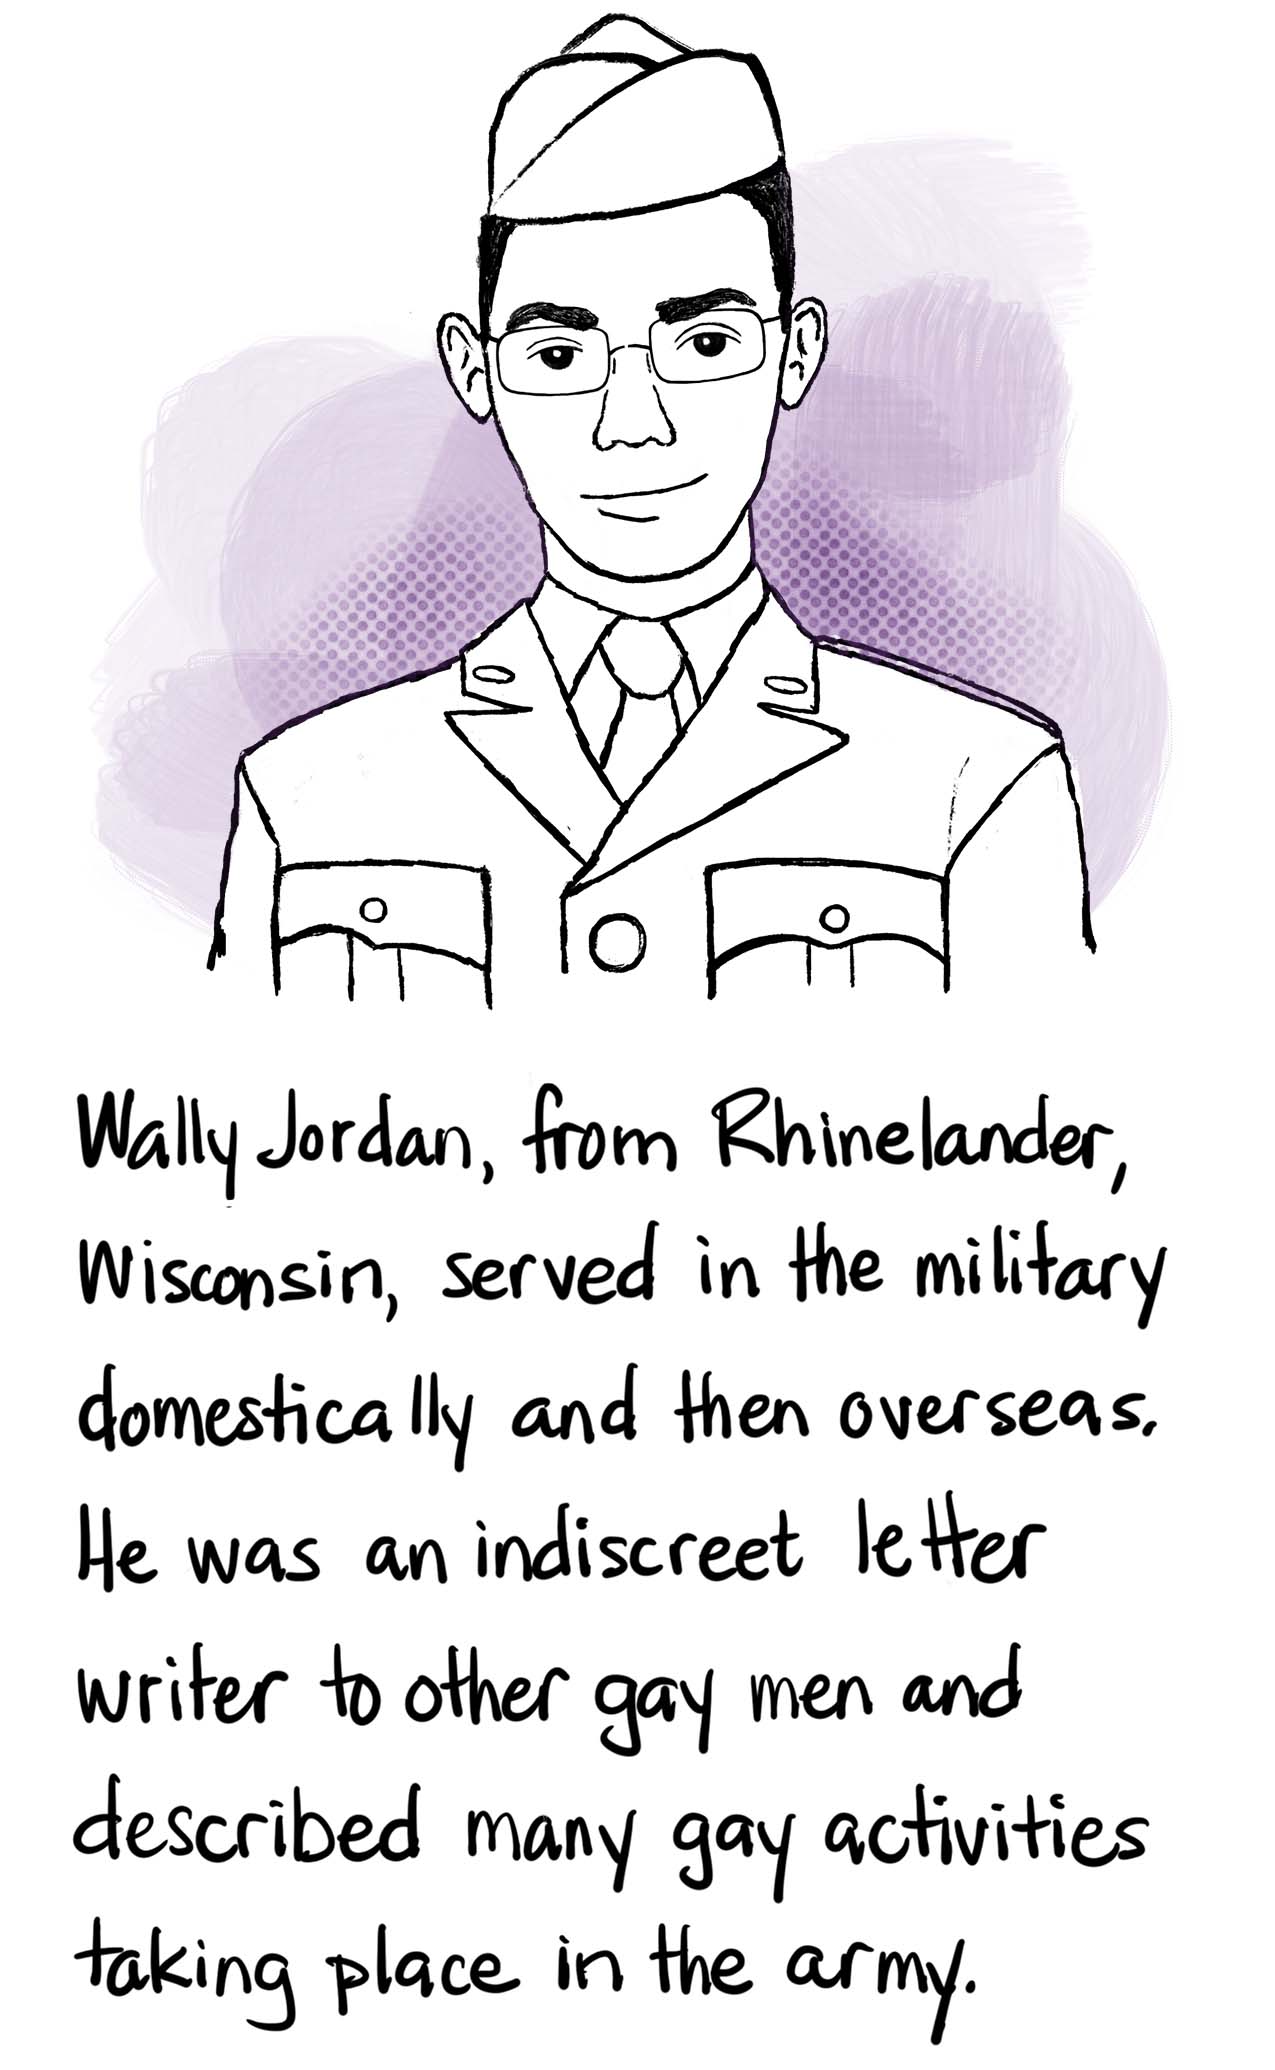 Image: A portrait of Wally in uniform. Text: Wally Jordan, from Rhinelander, Wisconsin, served in the military domestically and then overseas. He was an indiscreet letter writer to other gay men and described many gay activities taking place in the army.